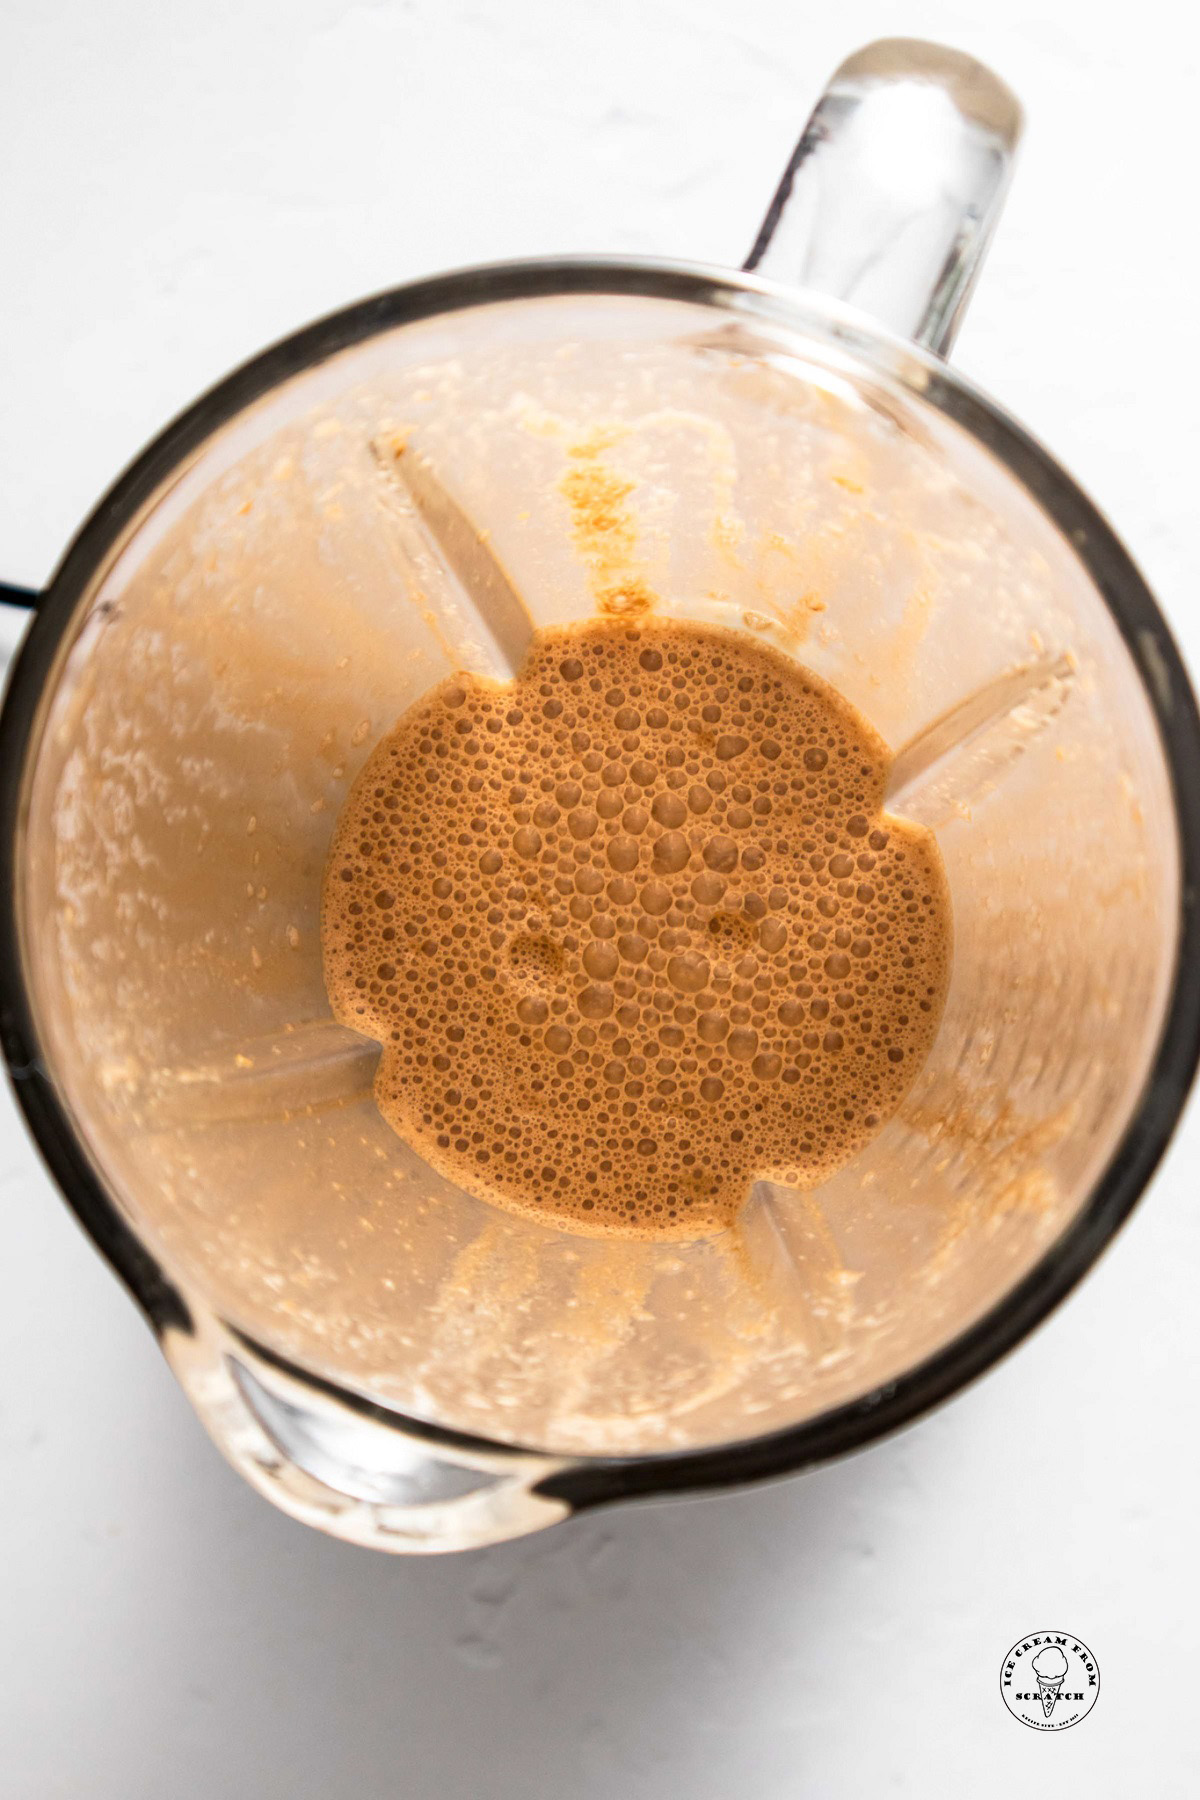 View of a blended coffee milkshake in a blender, from above.